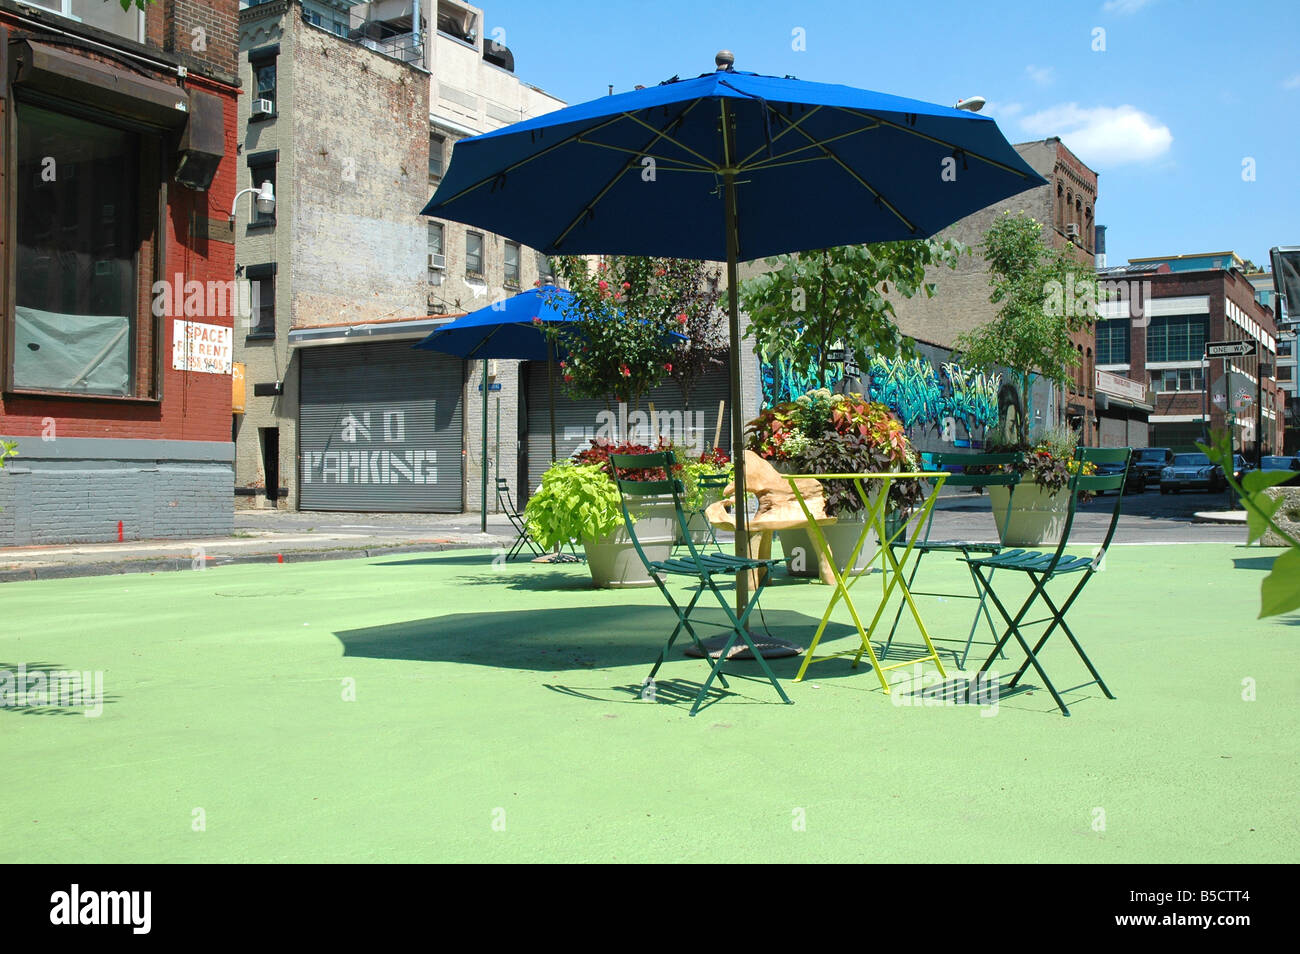 an outdoor cafe in dumbo brooklyn situated on a center island in the middle of converging streets in an industrial area Stock Photo